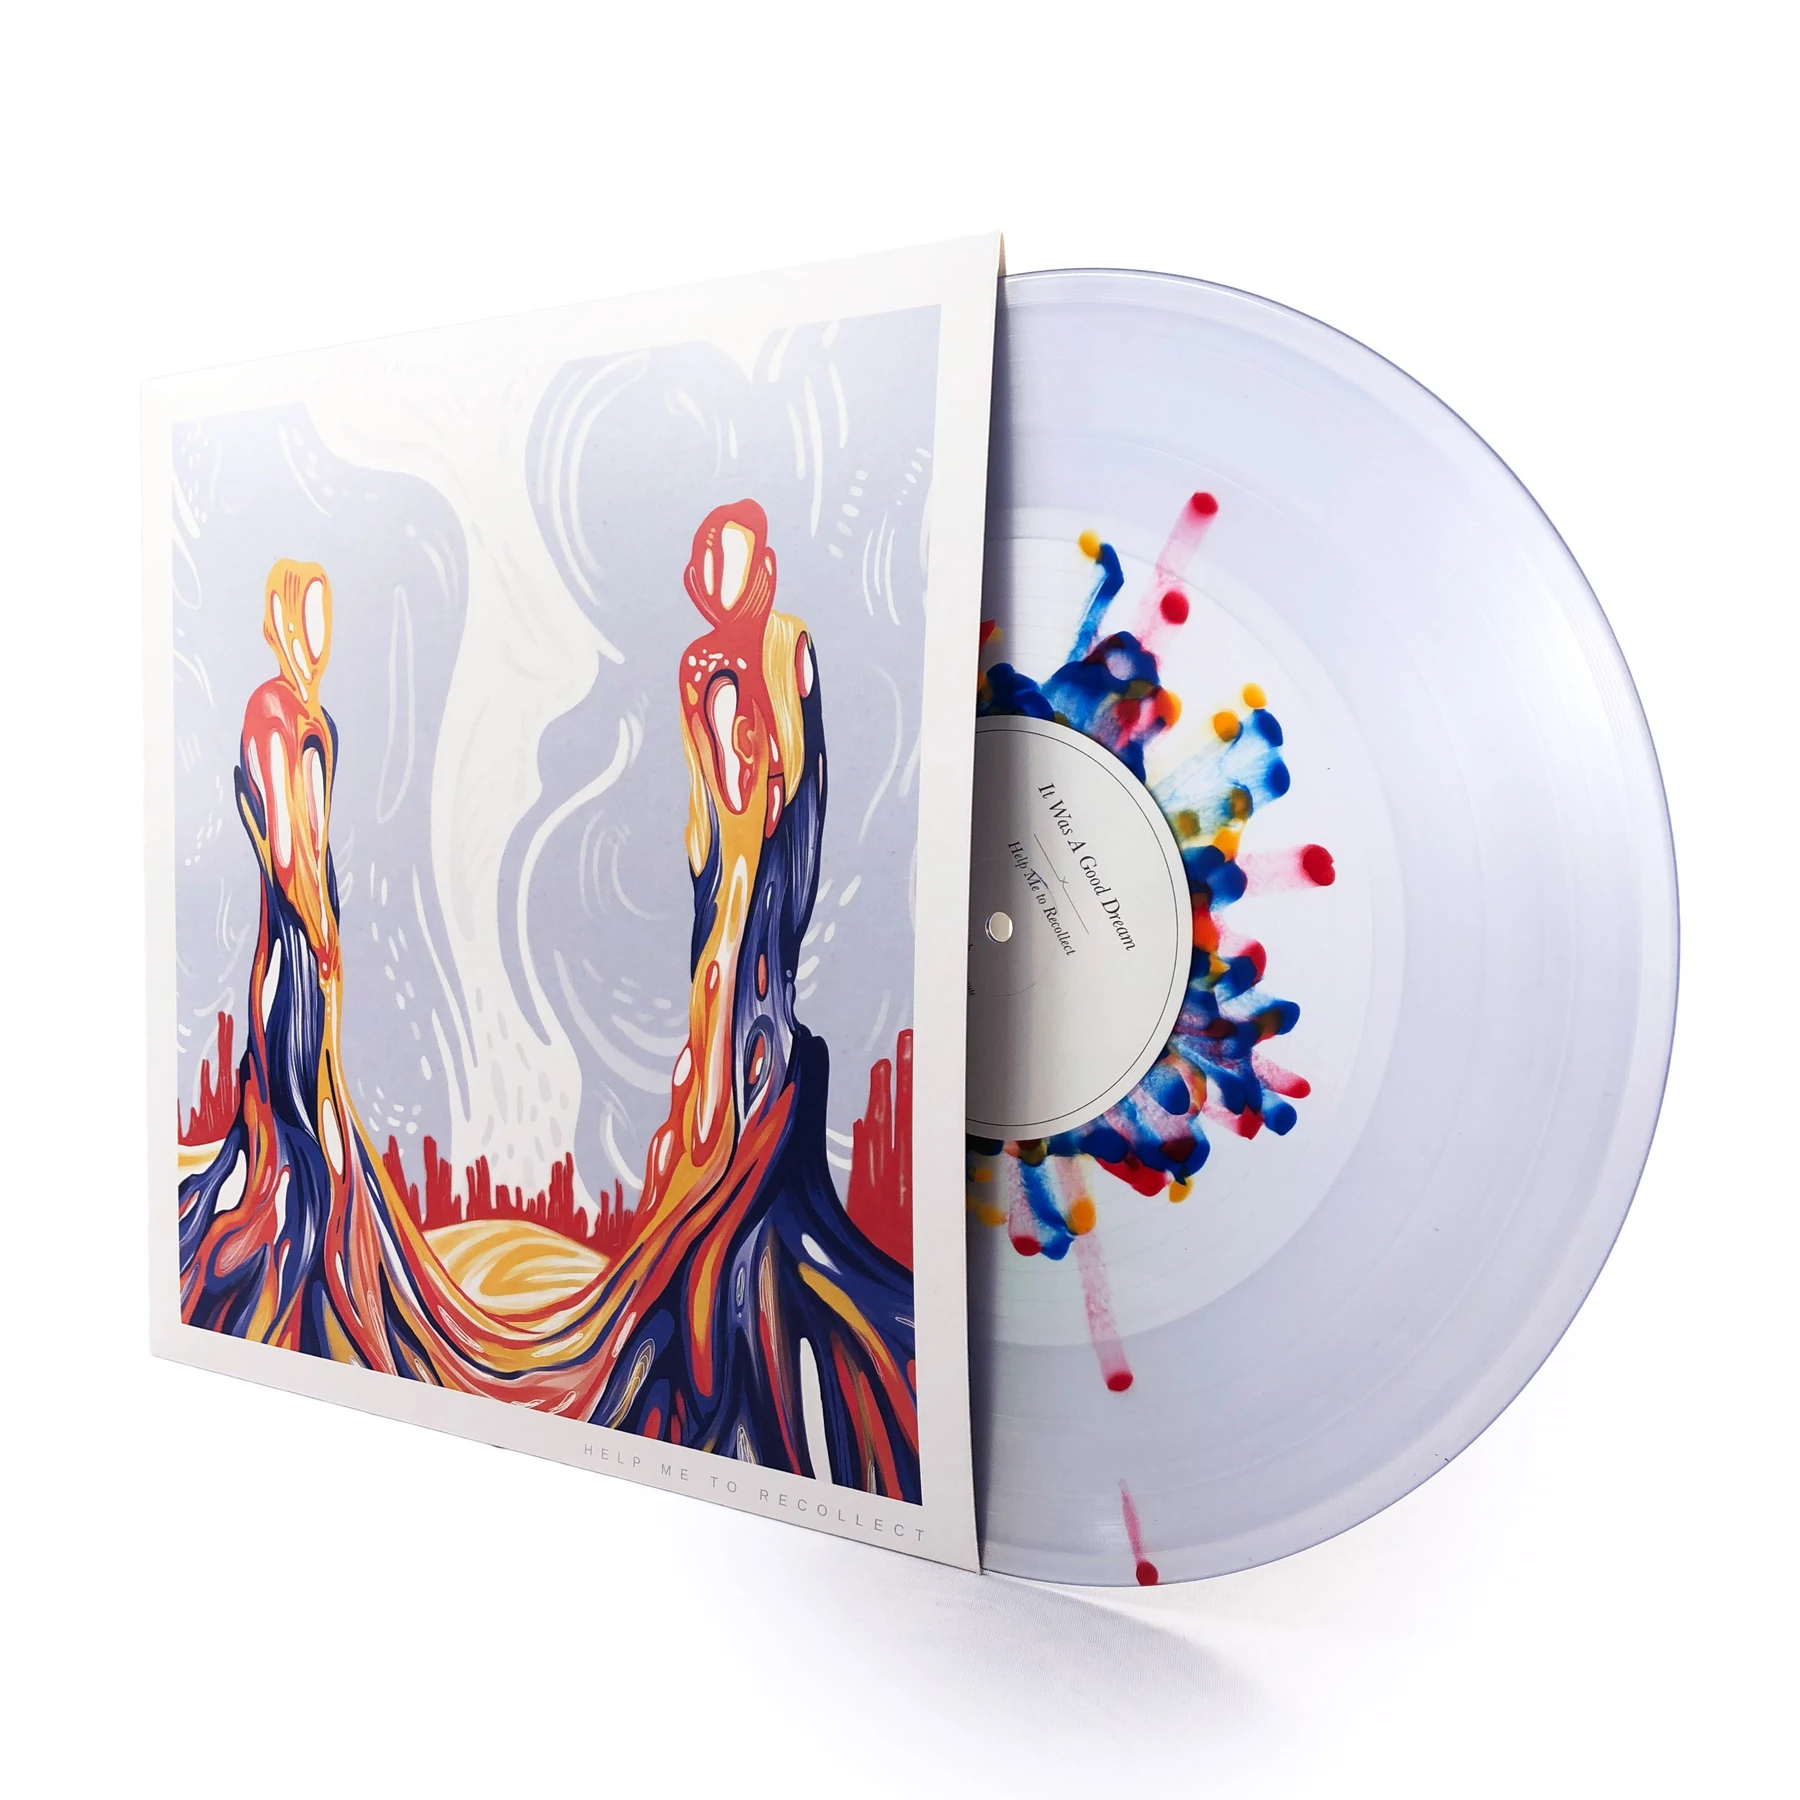 IT WAS A GOOD DREAM // HELP ME TO RECOLLECT - CRYSTAL CLEAR WITH BLUE/ORANGE/RED SPLATTER VINYL (LP)